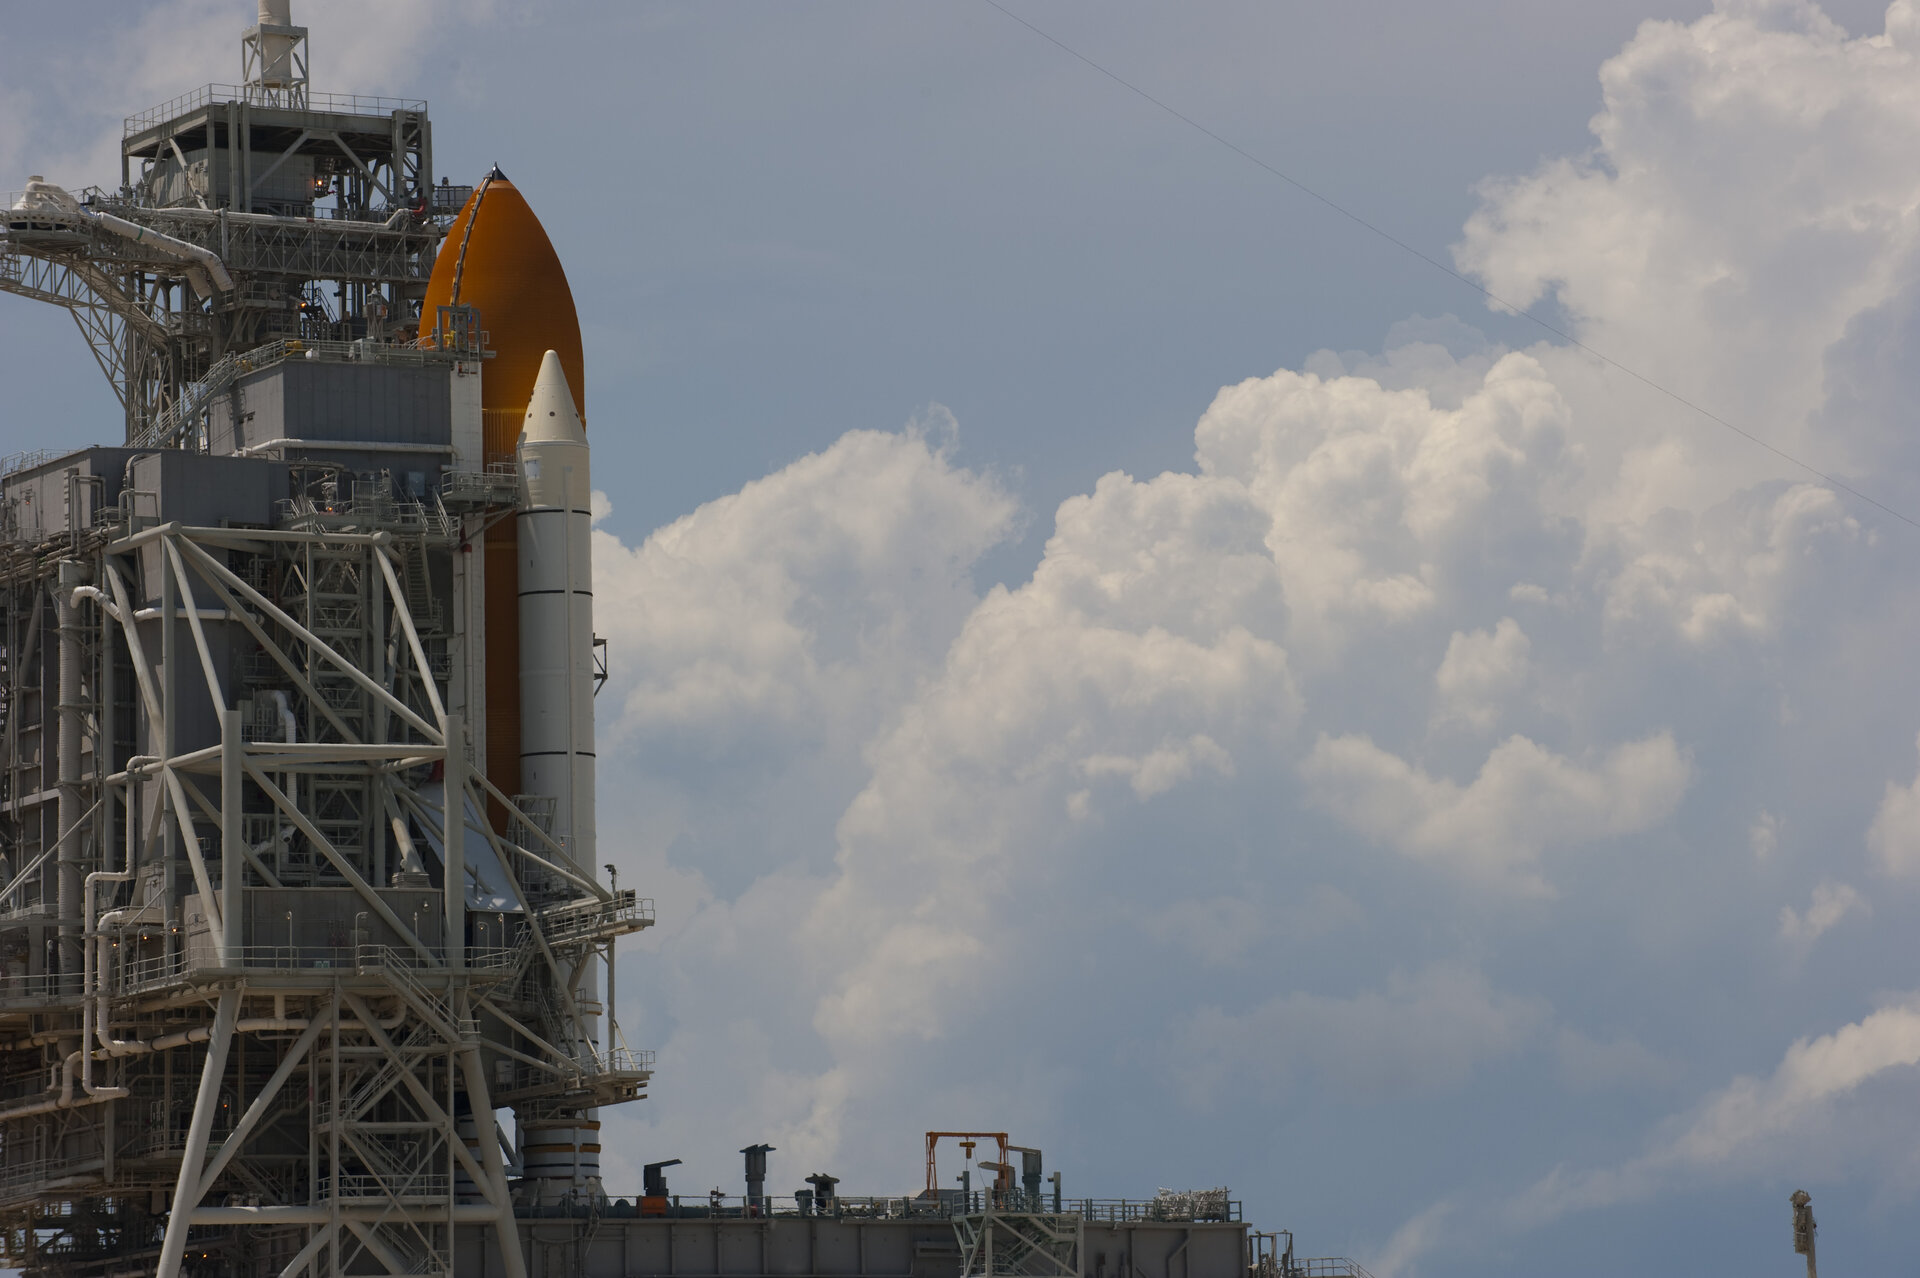 NASA's Space Shuttle Discovery on Launch Pad 39A